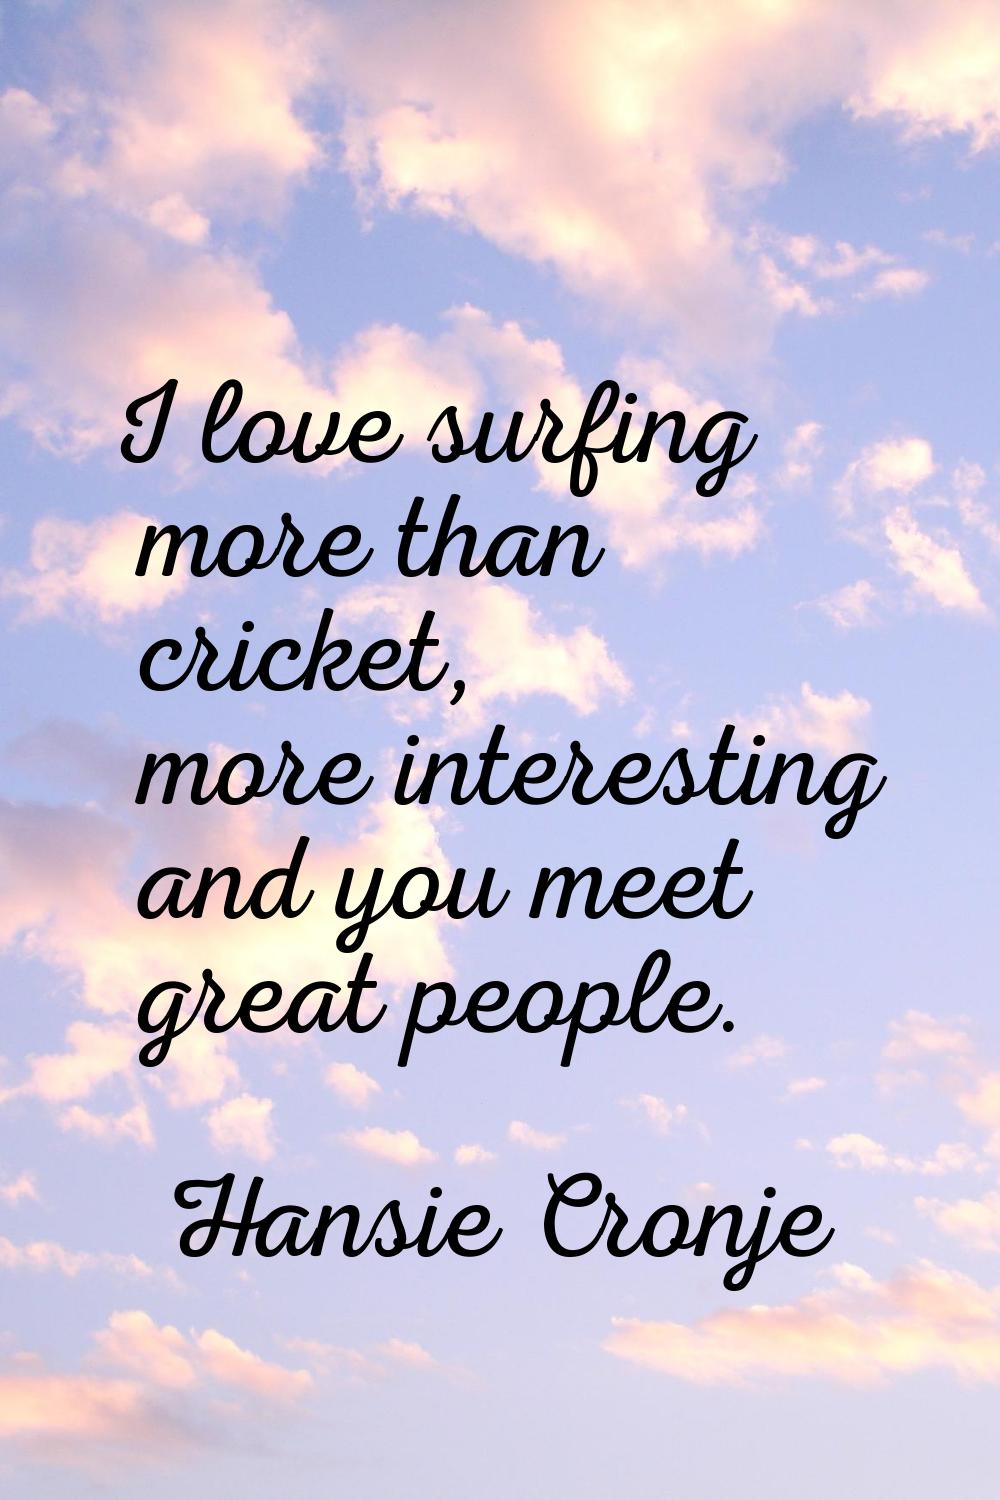 I love surfing more than cricket, more interesting and you meet great people.